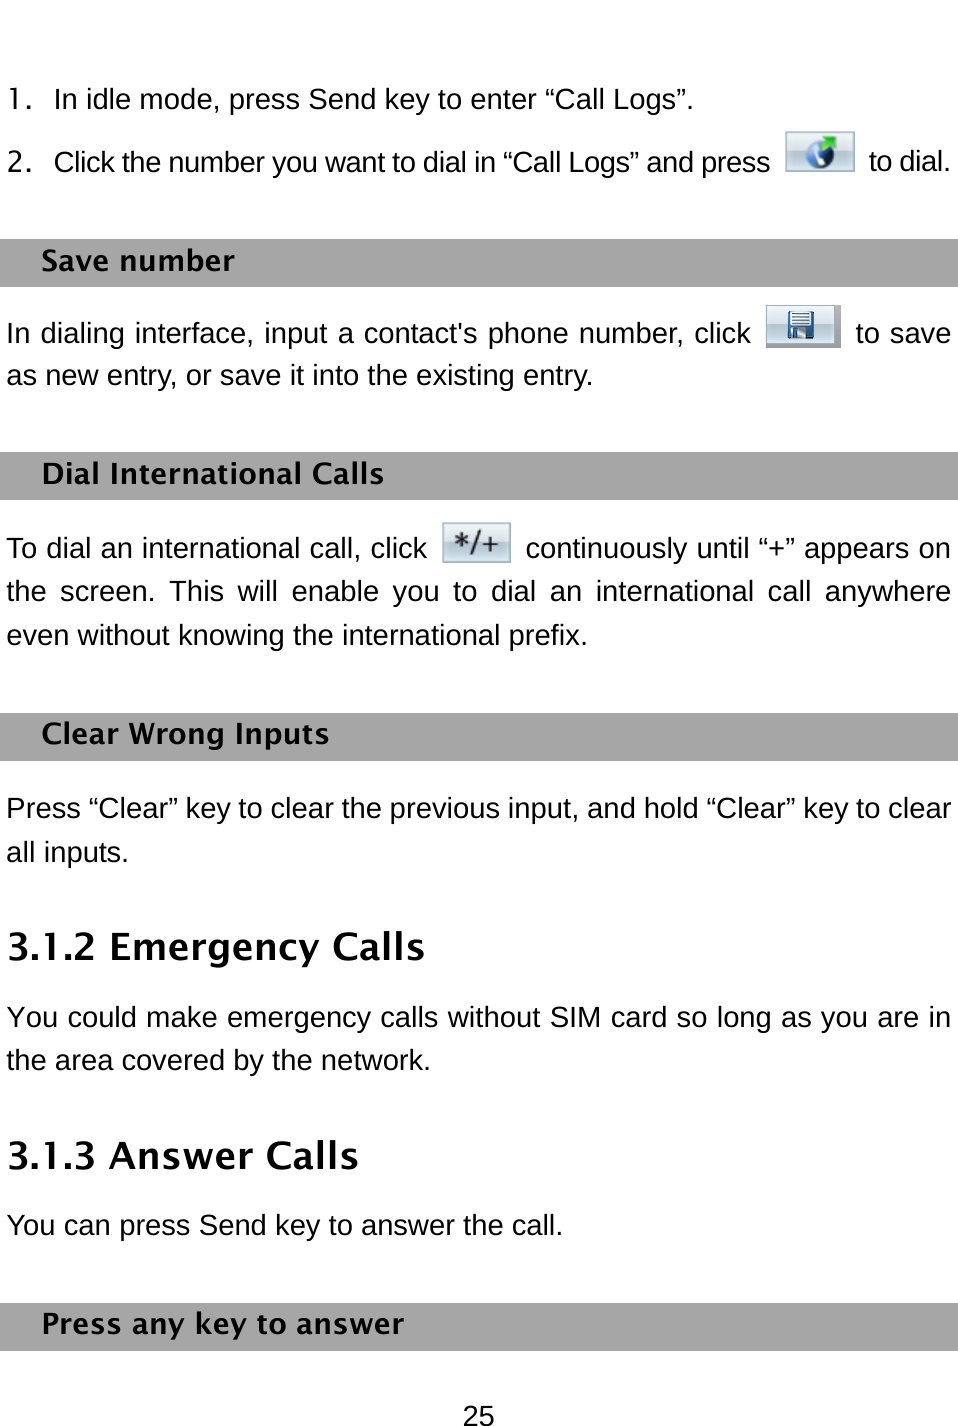  25 1.  In idle mode, press Send key to enter “Call Logs”. 2.  Click the number you want to dial in “Call Logs” and press   to dial.  Save number In dialing interface, input a contact&apos;s phone number, click   to save as new entry, or save it into the existing entry. Dial International Calls To dial an international call, click    continuously until “+” appears on the screen. This will enable you to dial an international call anywhere even without knowing the international prefix.   Clear Wrong Inputs Press “Clear” key to clear the previous input, and hold “Clear” key to clear all inputs. 3.1.2 Emergency Calls You could make emergency calls without SIM card so long as you are in the area covered by the network.   3.1.3 Answer Calls You can press Send key to answer the call. Press any key to answer 